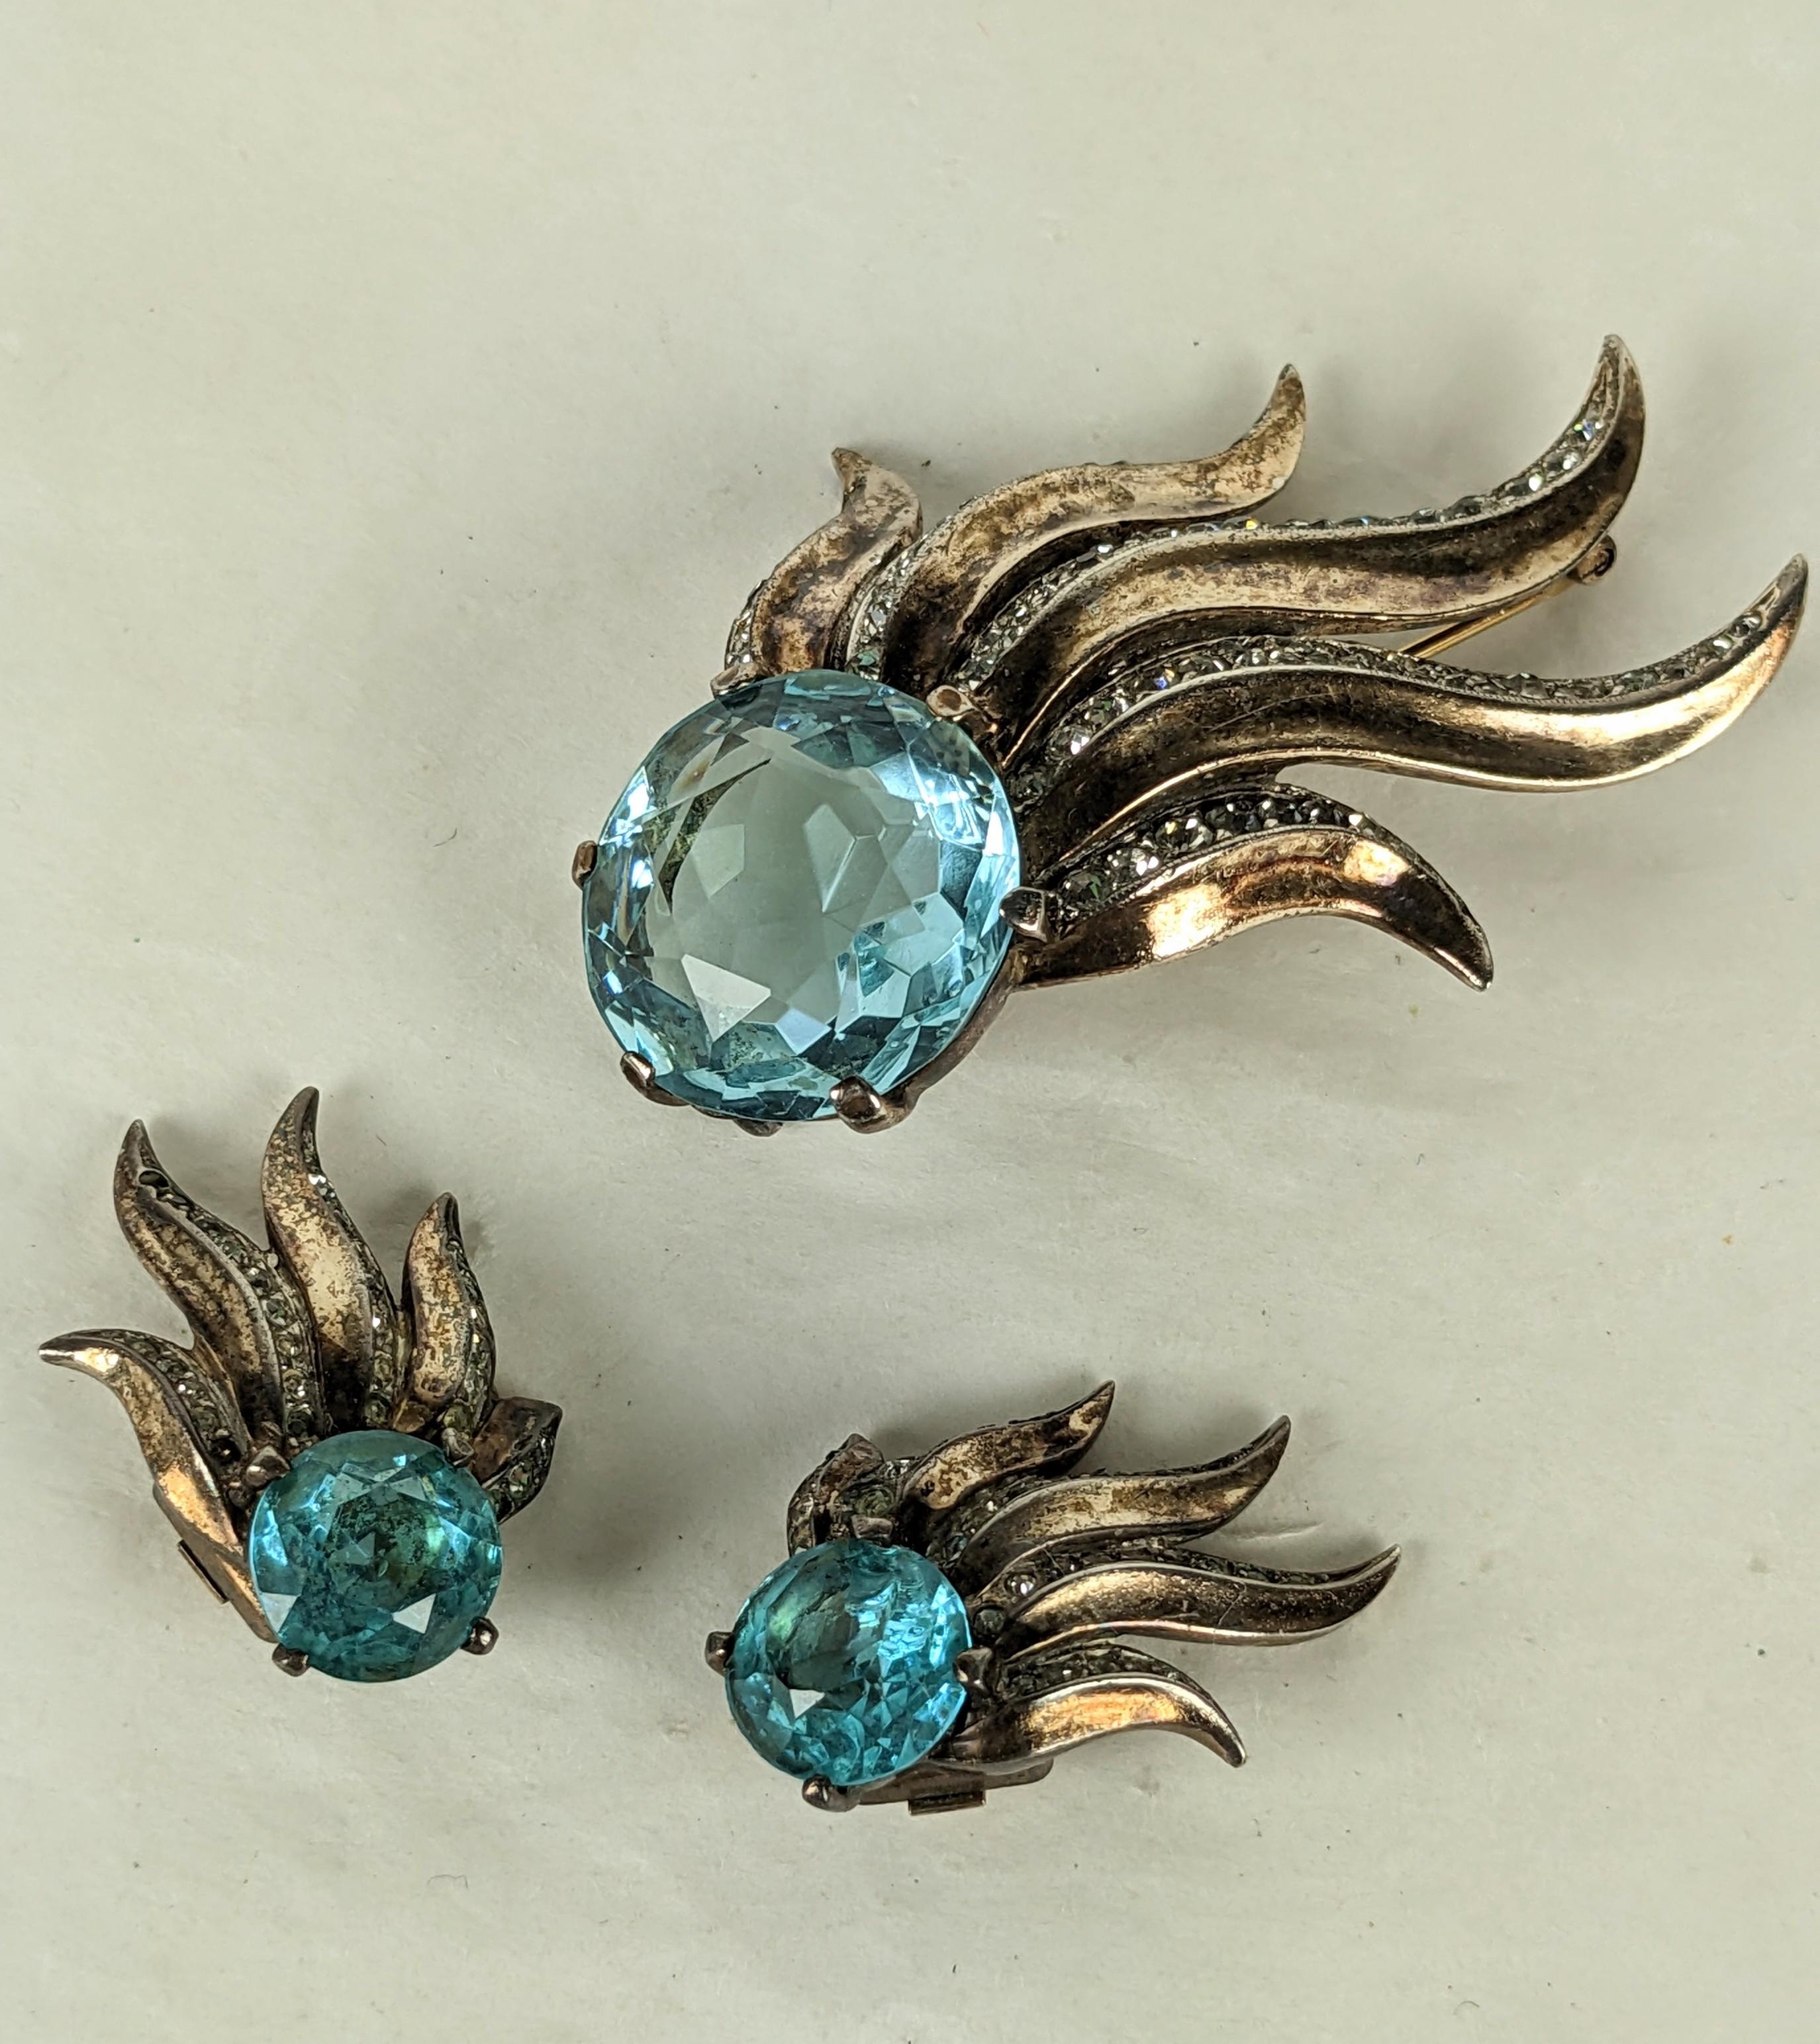 Striking Trifari Sterling Vermeil Retro Aquamarine Suite from the 1940's. Central aquamarine paste design with pave trimmed leaf forms. Brooch 2.5 x 1.5